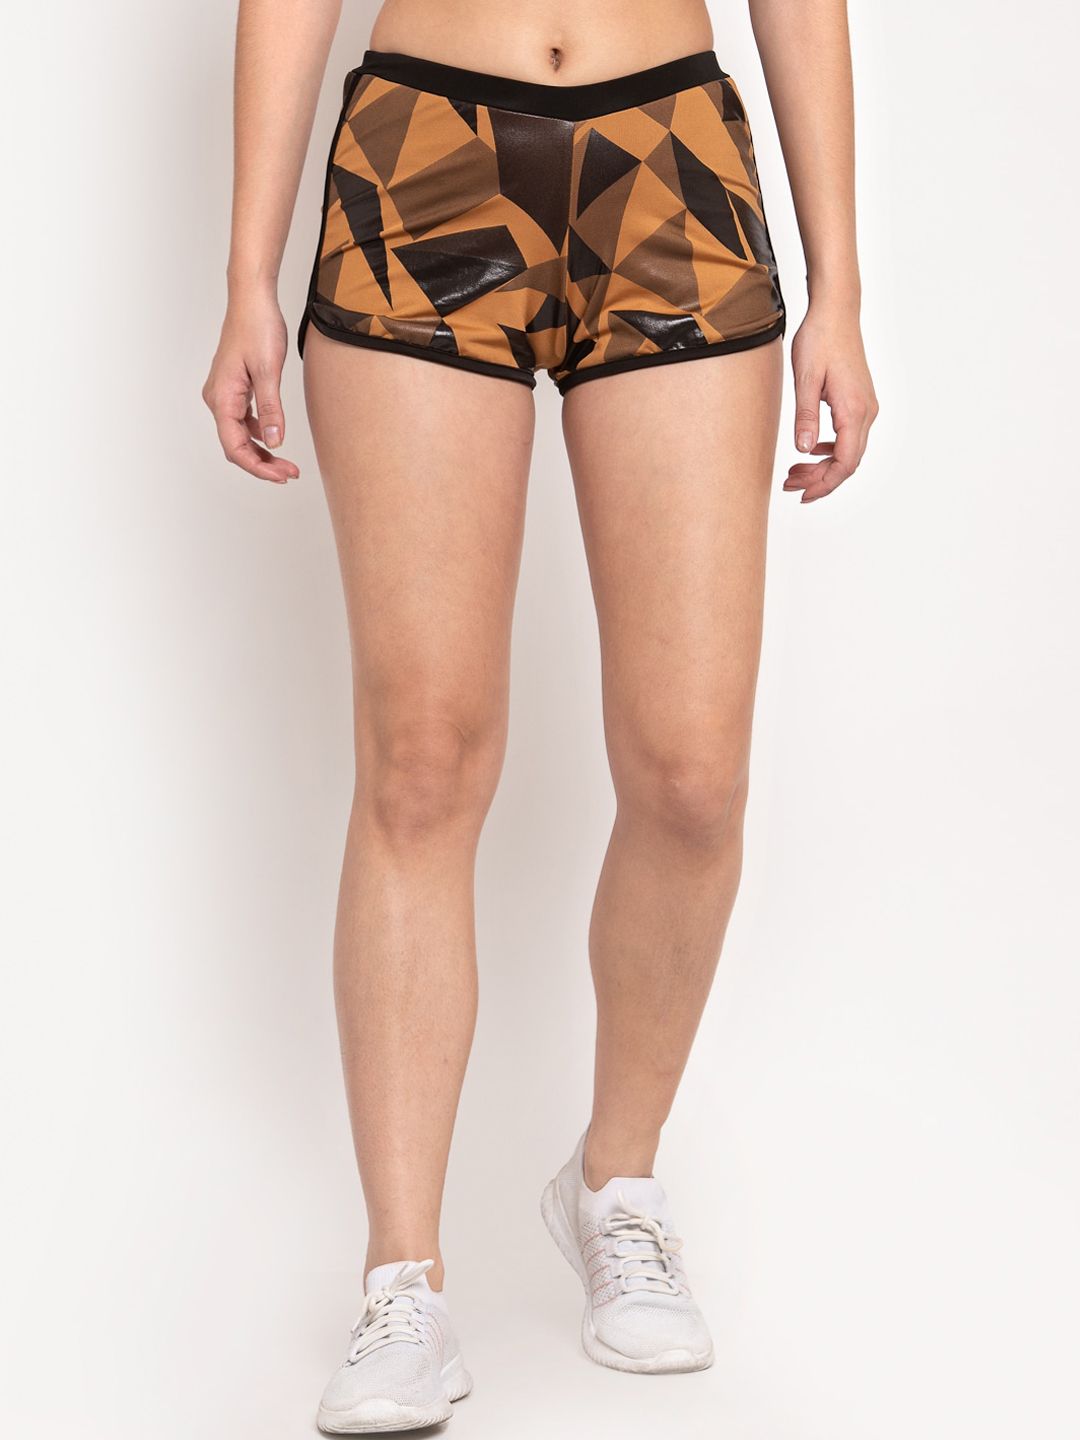 CUKOO Women Tan & Brown Geometric Printed Stretchable Slim Fit Sports Shorts Price in India